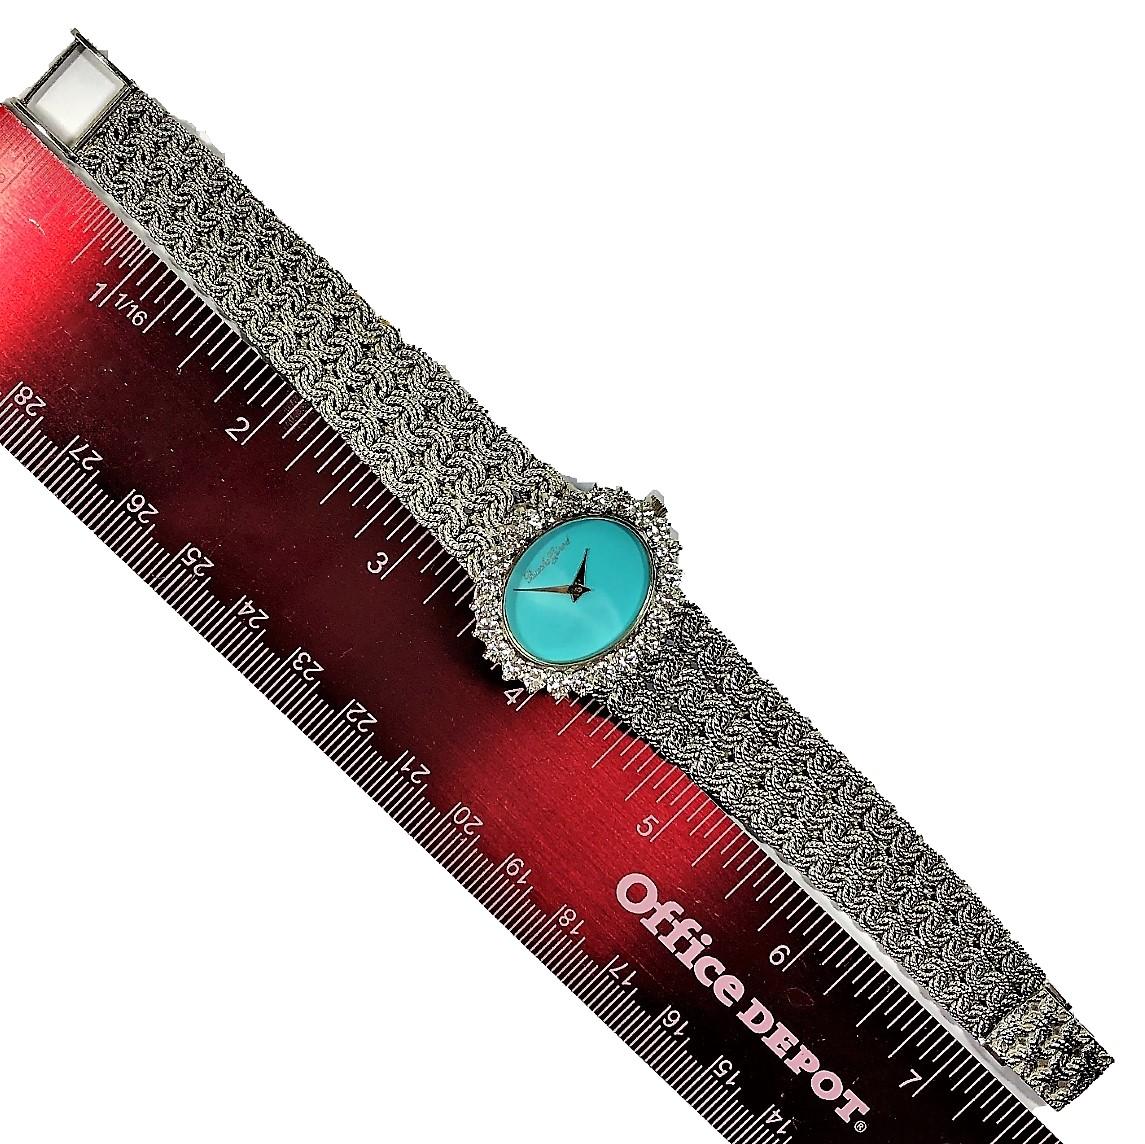 White Gold Ladies Bueche Girod Watch with Turquoise Dial and Large Diamond Bezel 2